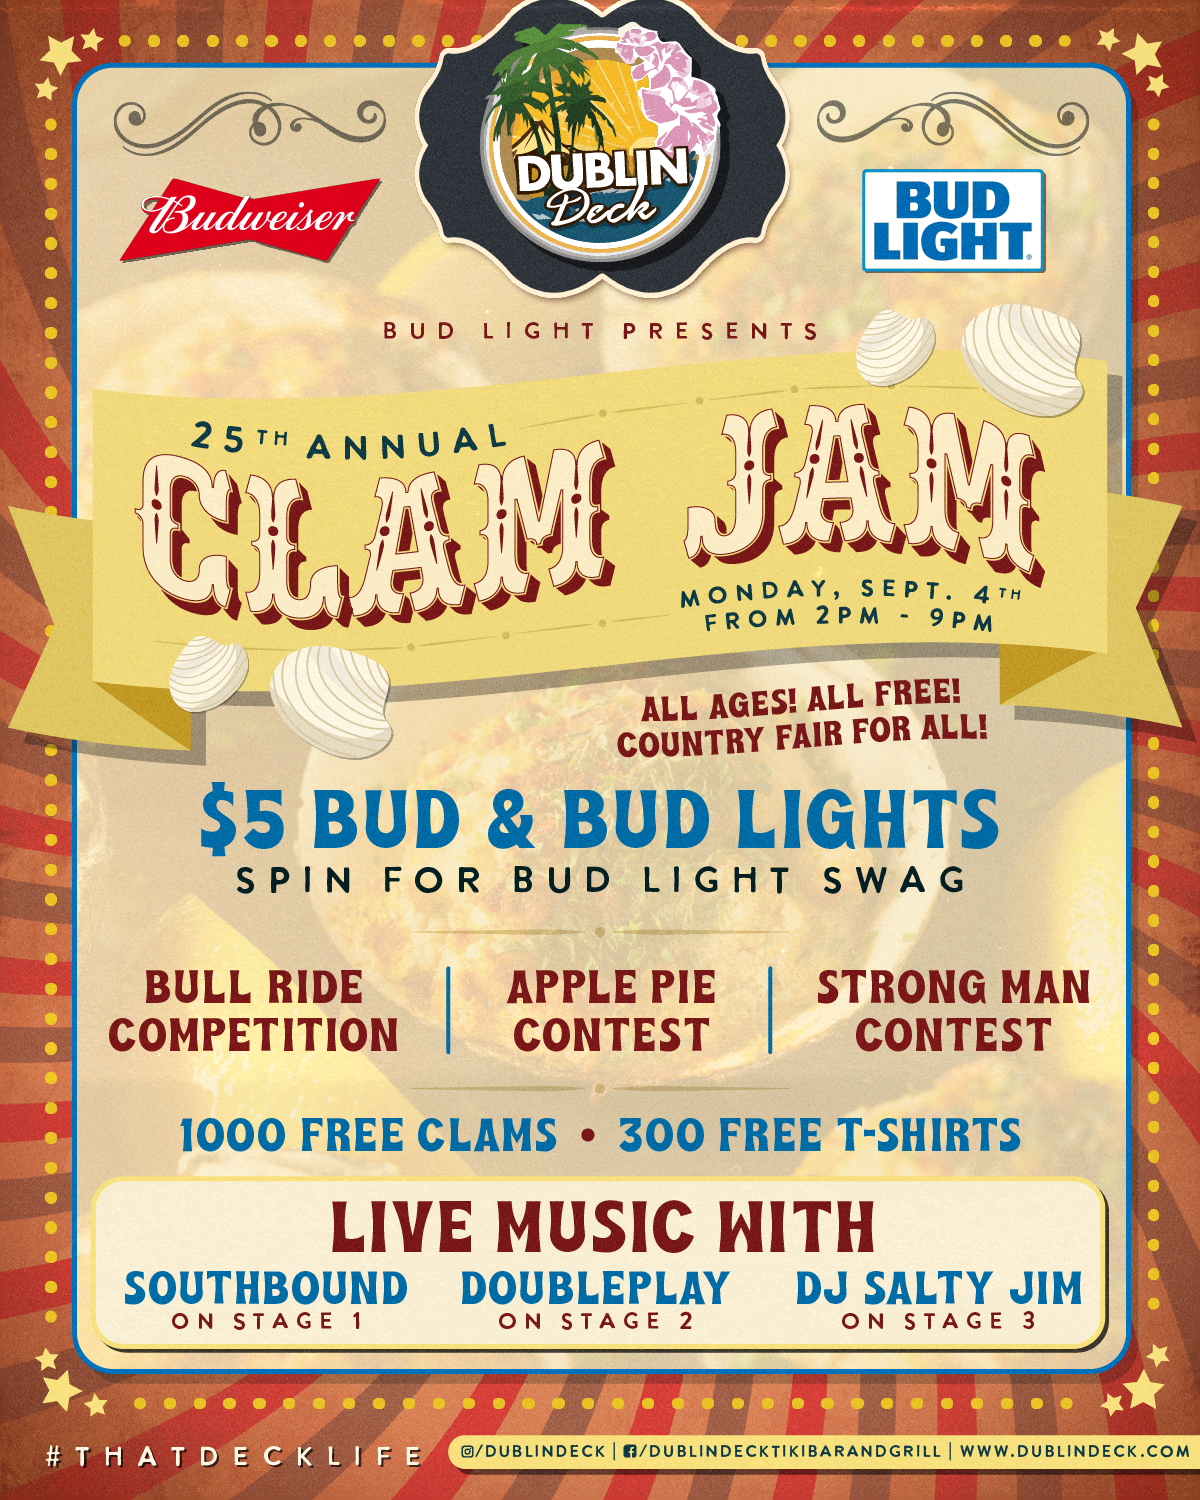 Bud Light presents ...  the 25th Annual Clam Jam Country Fair at Dublin Deck! Celebrate Labor Day with us from 2PM-9PM and enjoy $5 Bud & Bud Lights, bull ride competition, apple pie competition, strong man contest, and live music with Southbound, Doubleplay, and DJ Salty Jim! 1000  FREE CLAMS and 300 FREE T-SHIRTS!

